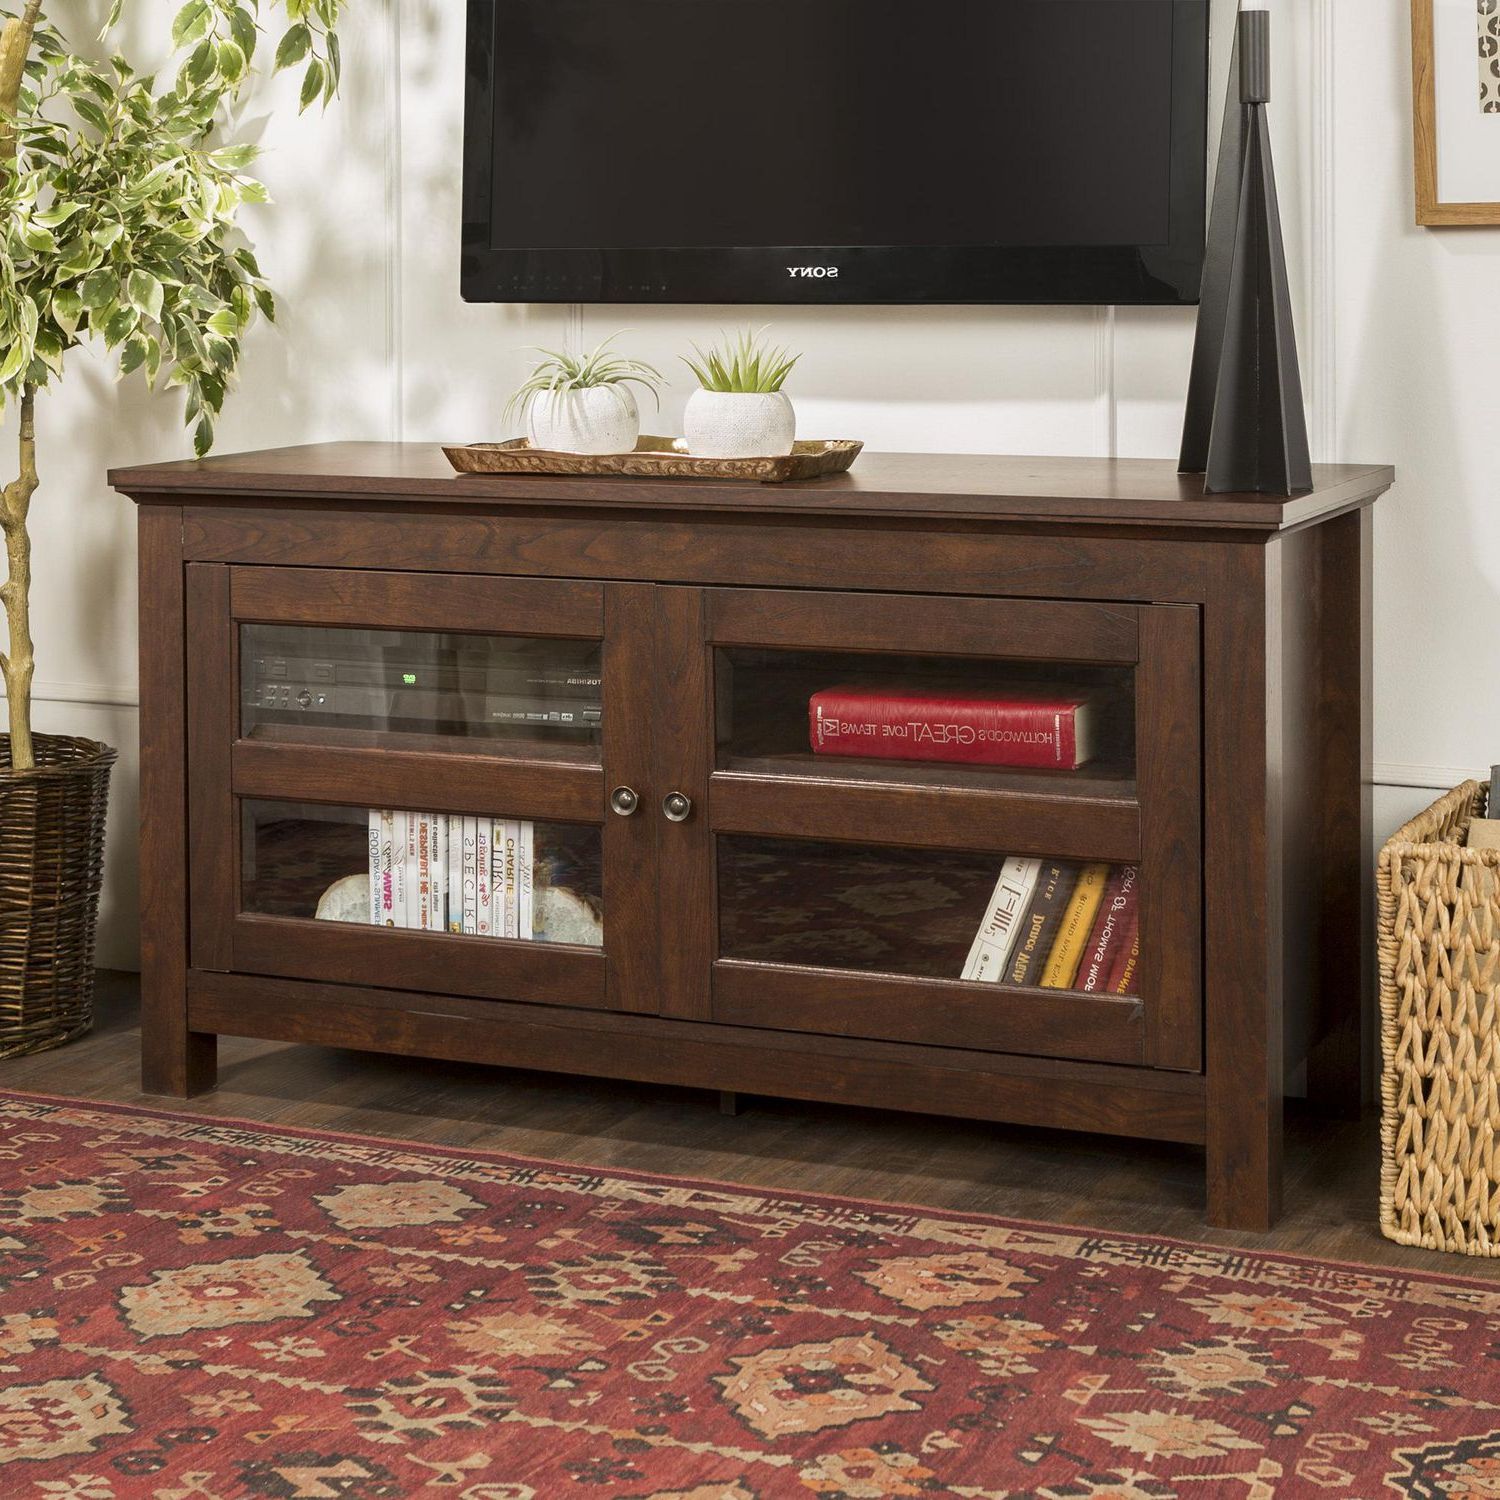 Manor Park Simple Wood Tv Stand For Tv's Up To 48 For Antea Tv Stands For Tvs Up To 48" (View 9 of 20)